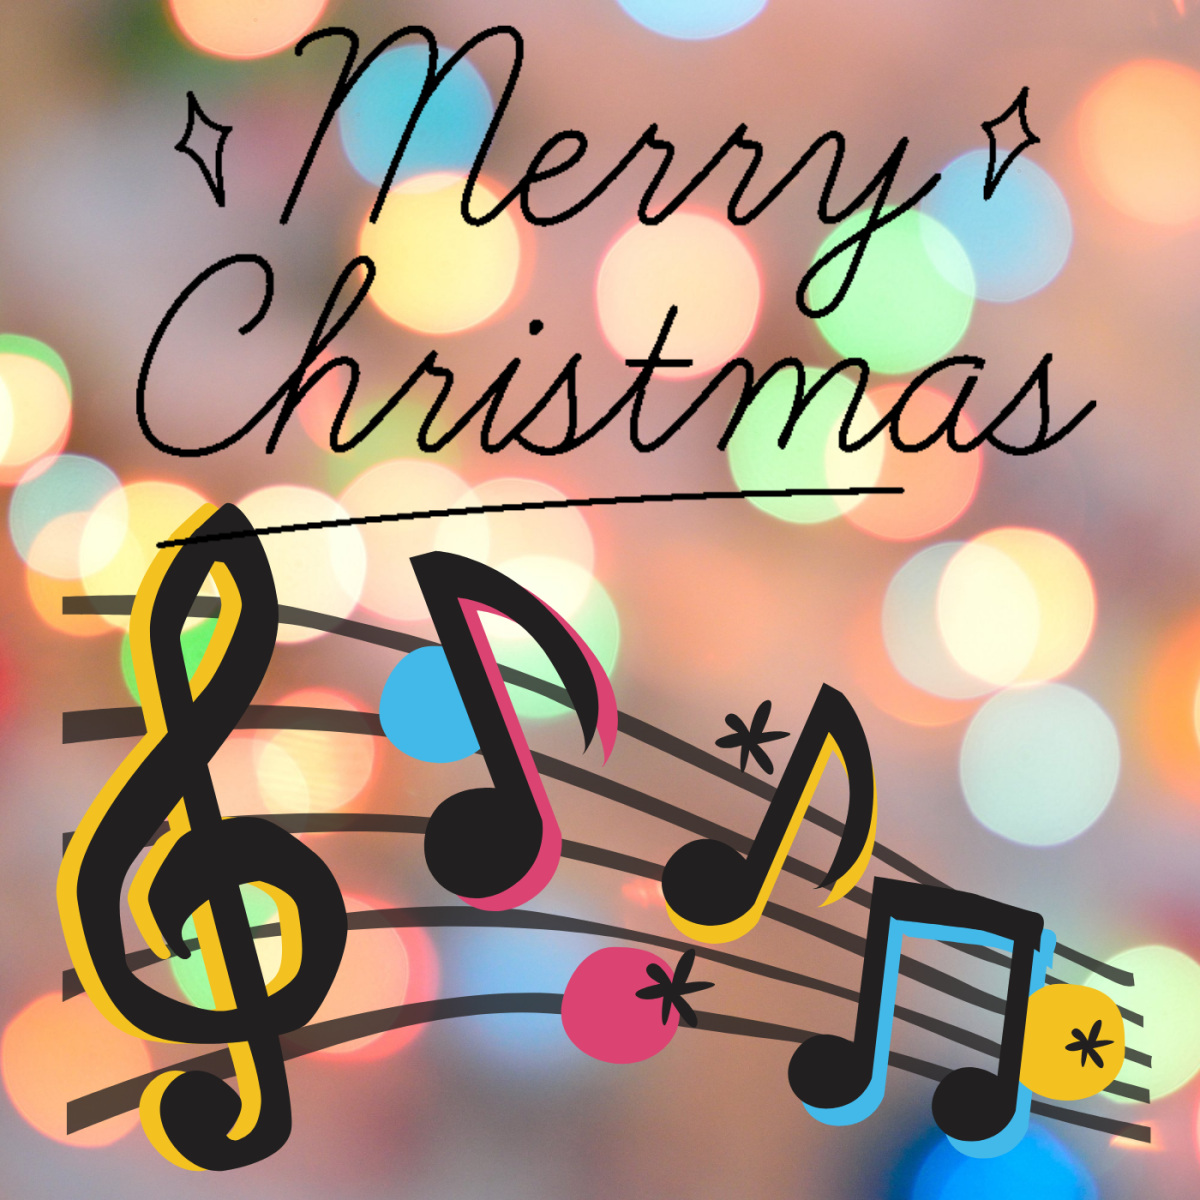 Check out this eclectic holiday playlist!